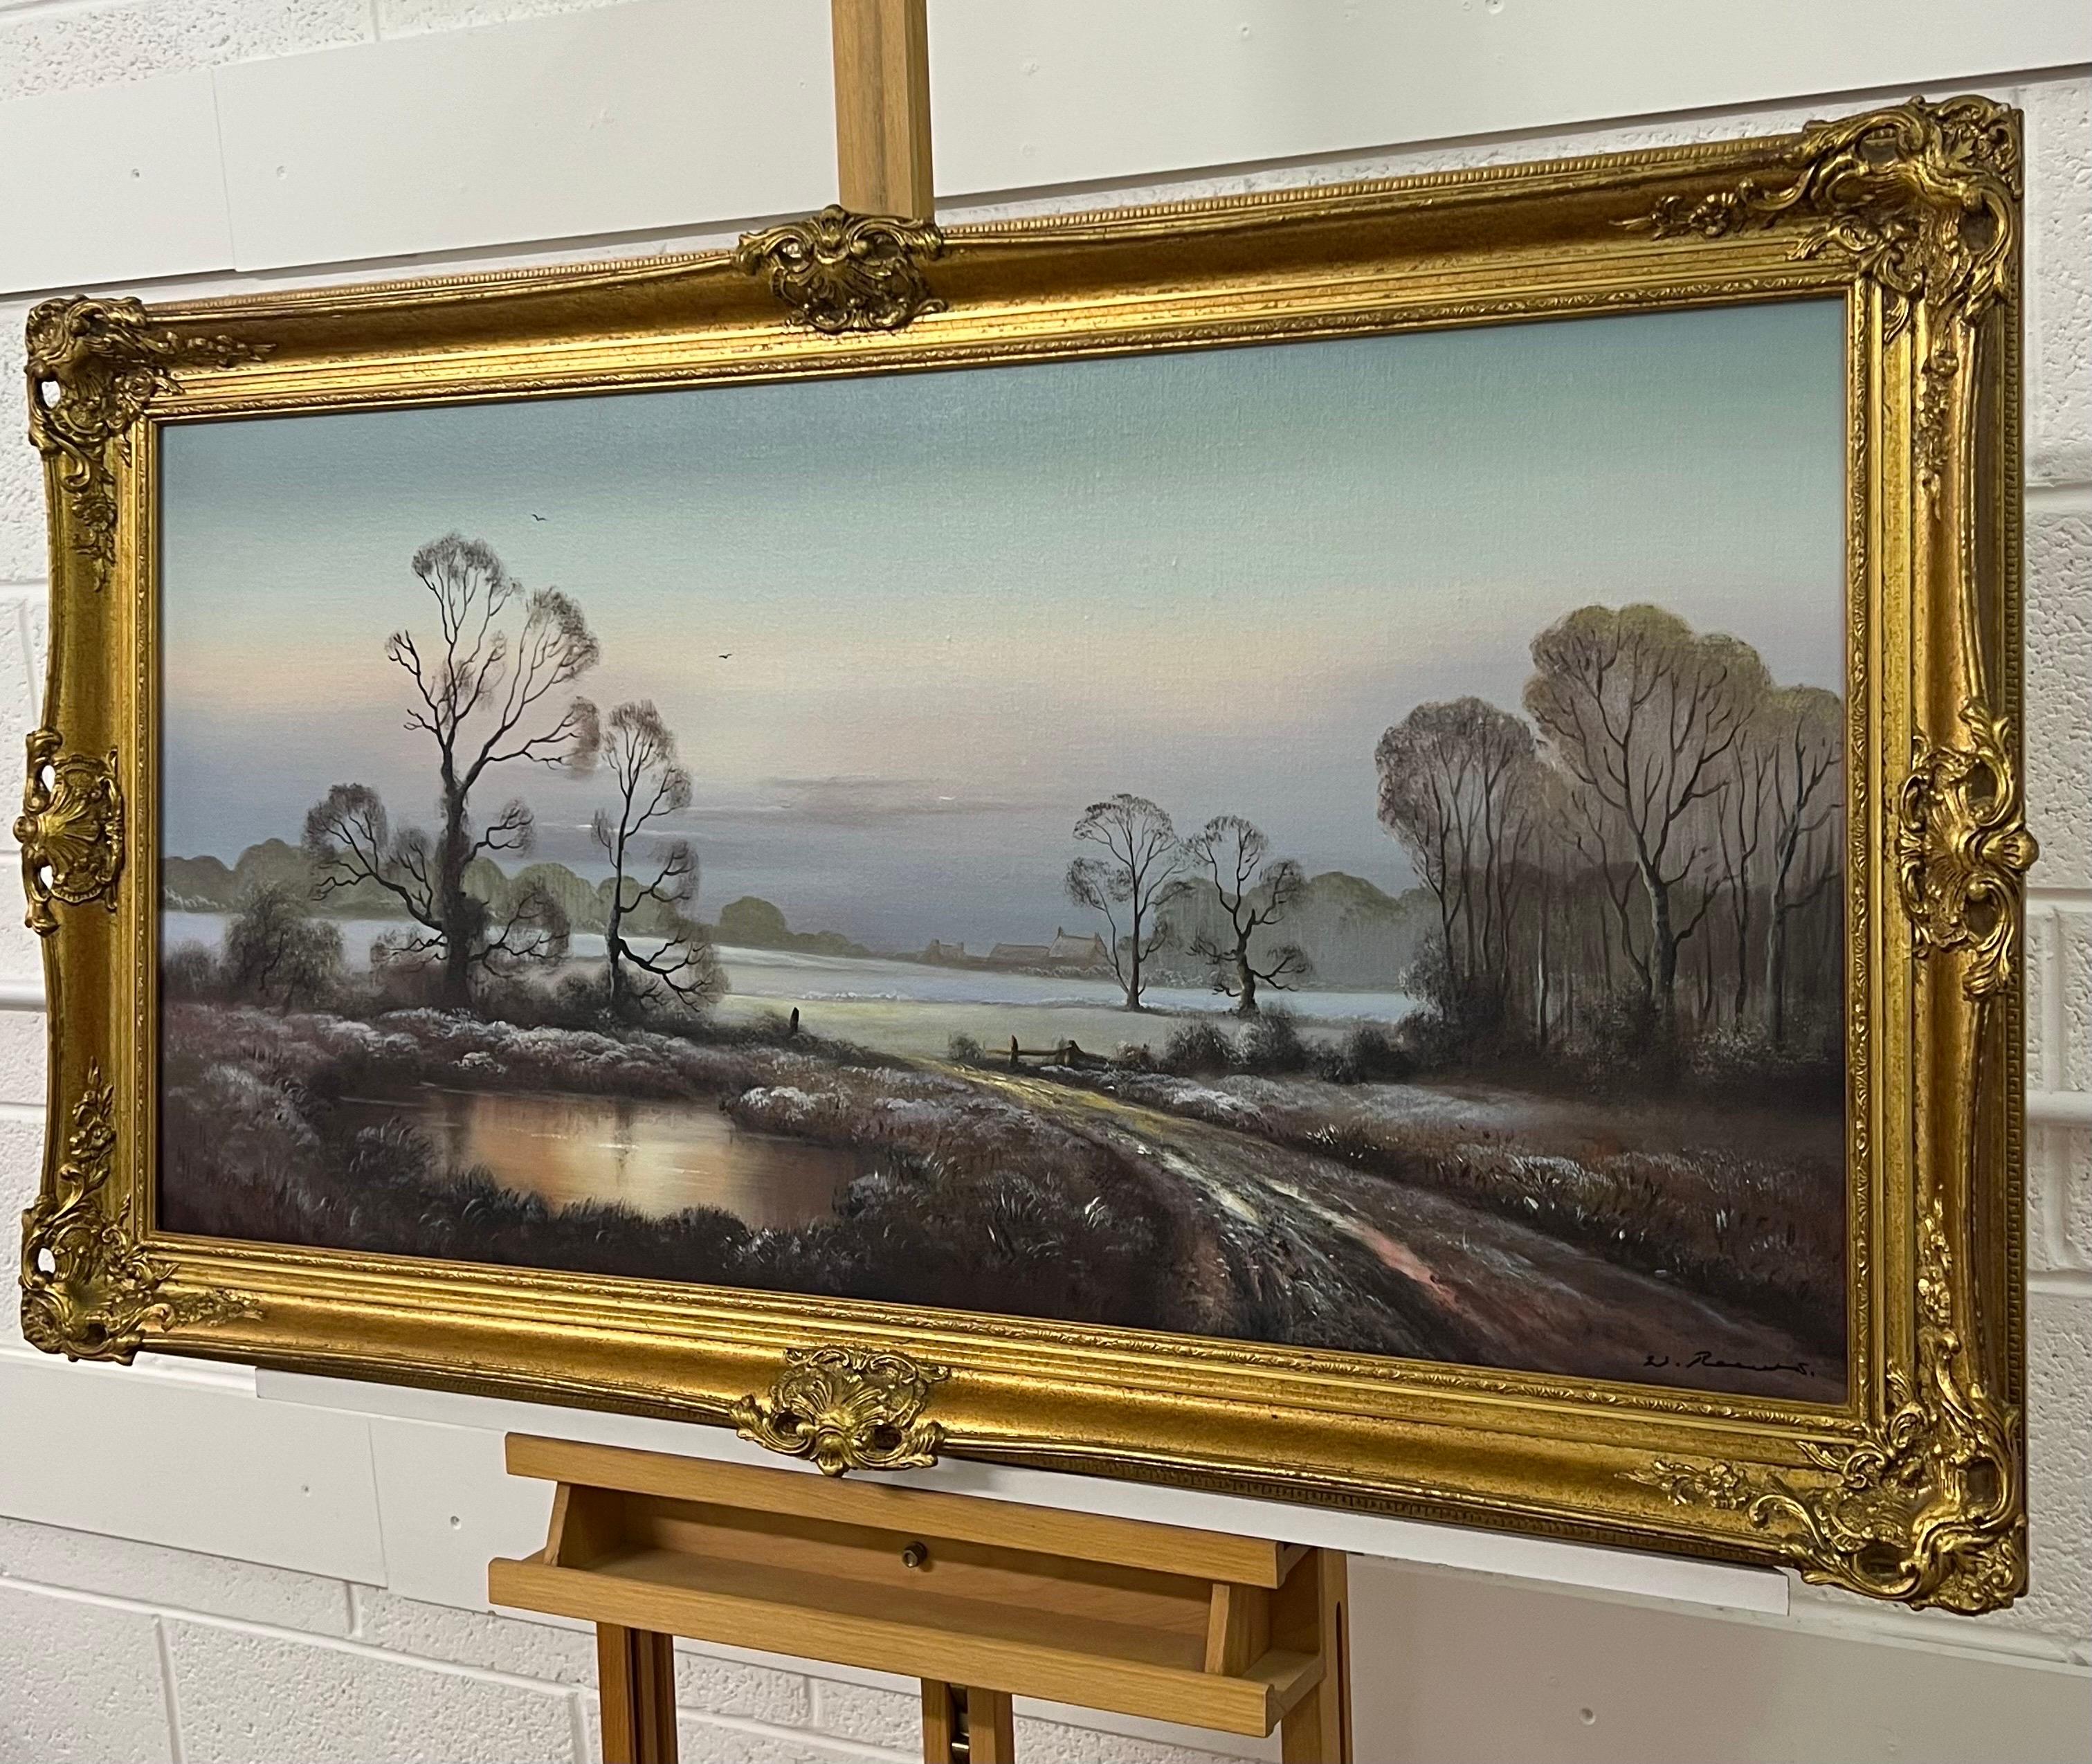 Winter Mist at a Farm in the English Countryside by 20th Century British Artist, Wendy Reeves

Art measures 40 x 20 inches
Frame measures 46 x 26 inches (framed in a high quality ornate gold moulding) 

Wendy Reeves garnered acclaim for her Scottish